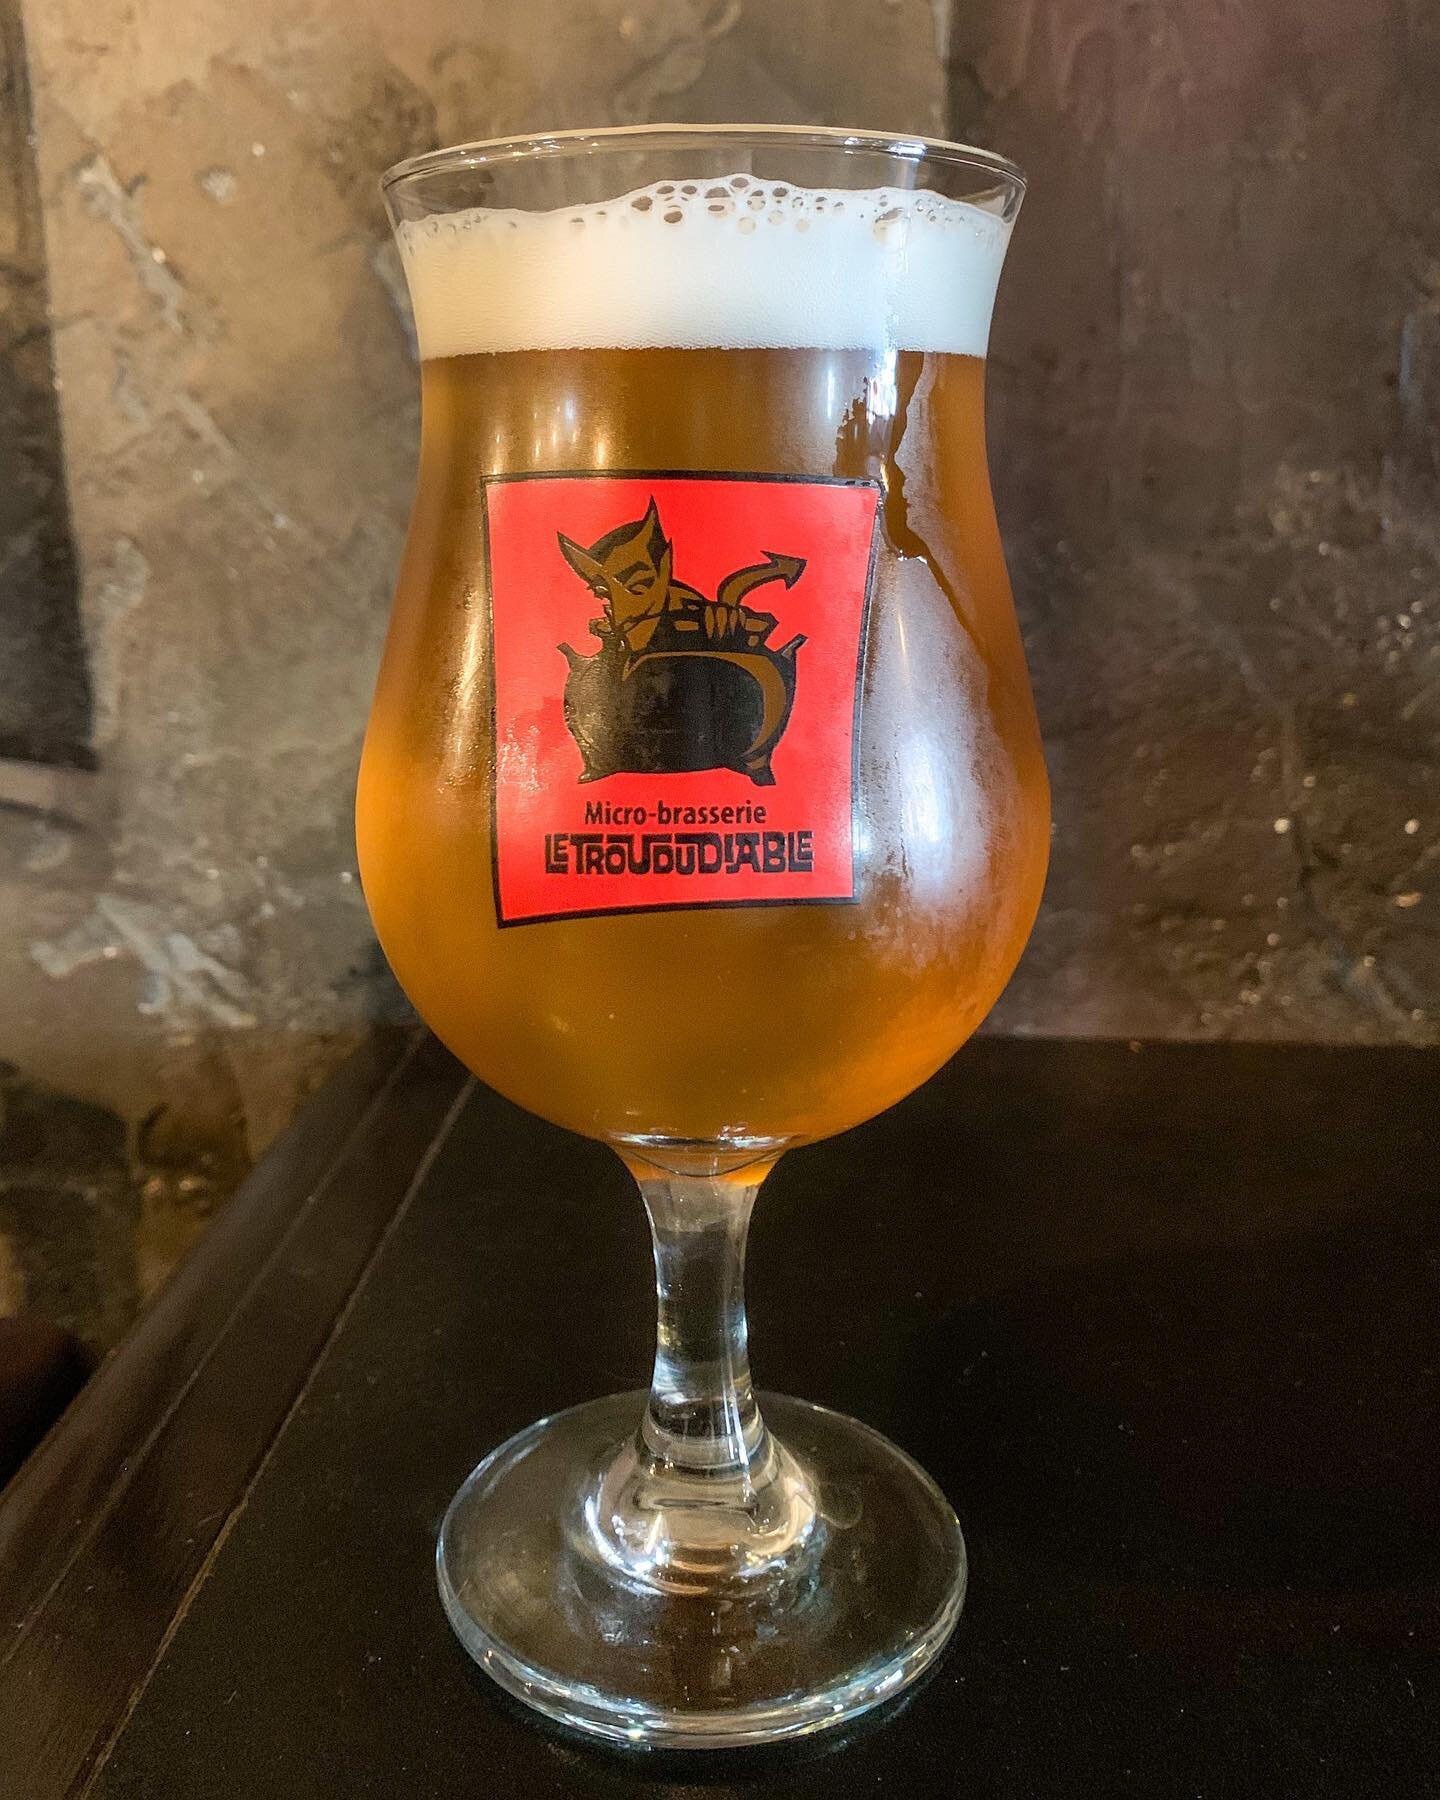 ⚠️ NEW DRAFT BEER ALERT ⚠️

We now have the @troududiable MACTAVISH Legendary Ale on tap! (Downtown Moncton location only)🍺

💬 A little about the beer: it's an award winning small batch craft pale ale. Inspired by American Pale Ales, MacTavish rele